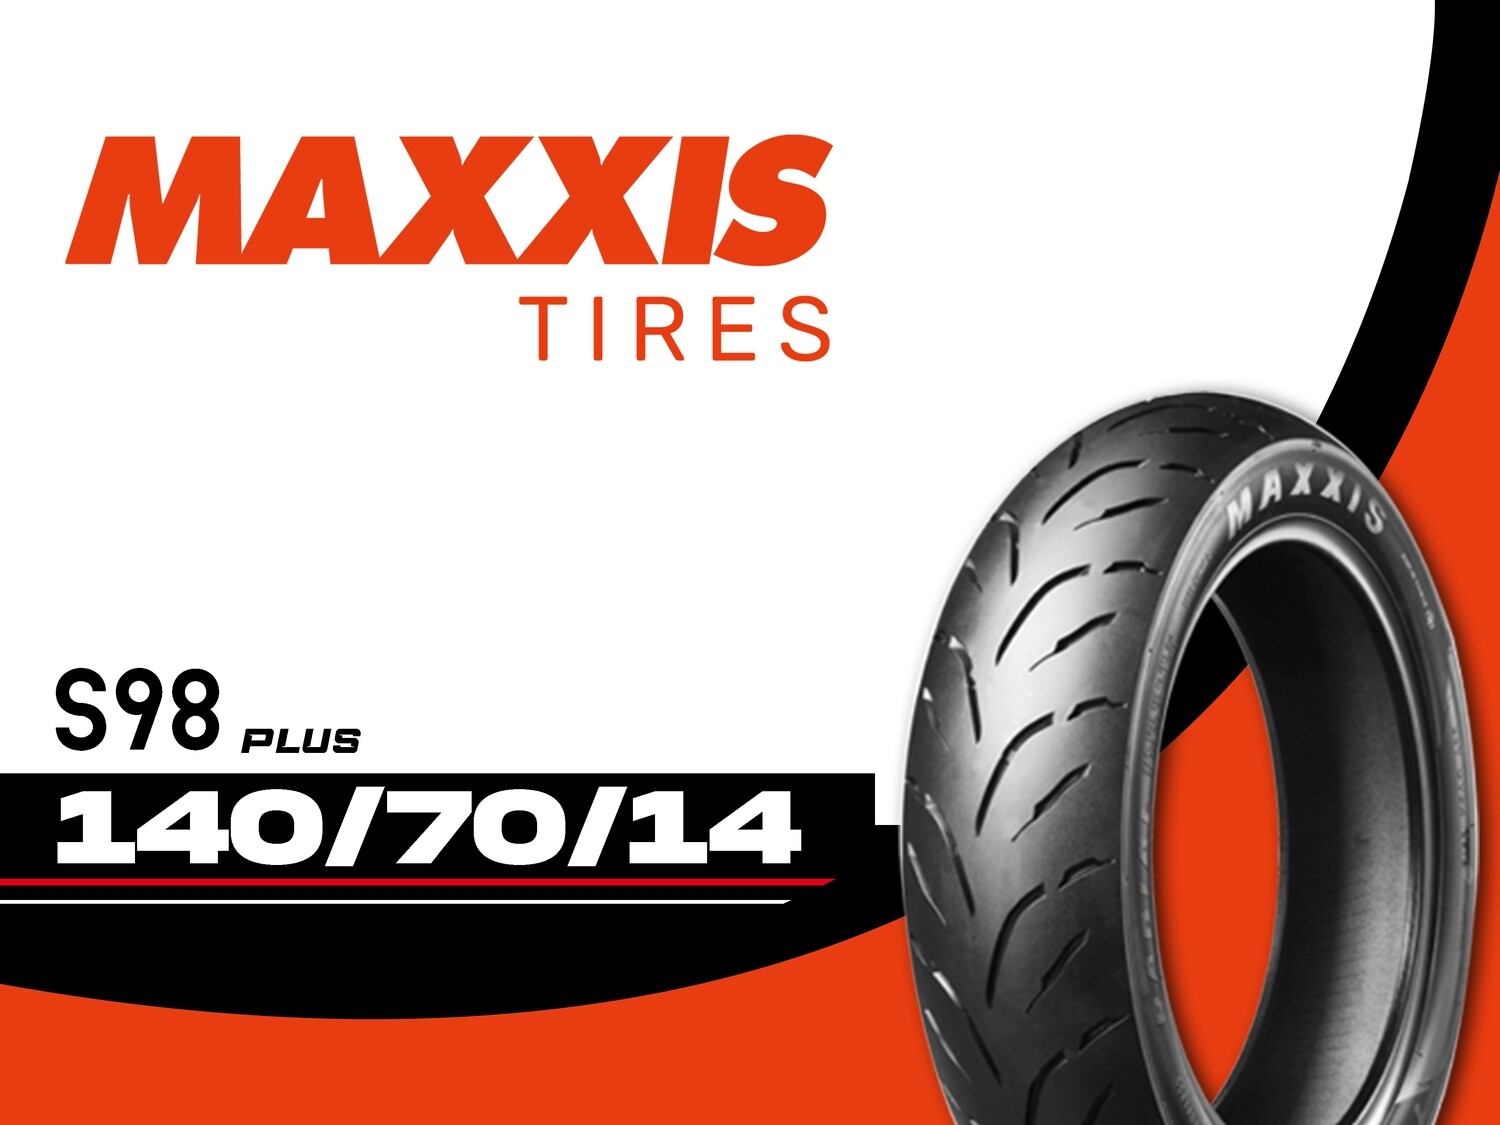 MAXXIS TIRE S98 plus 140/70/14